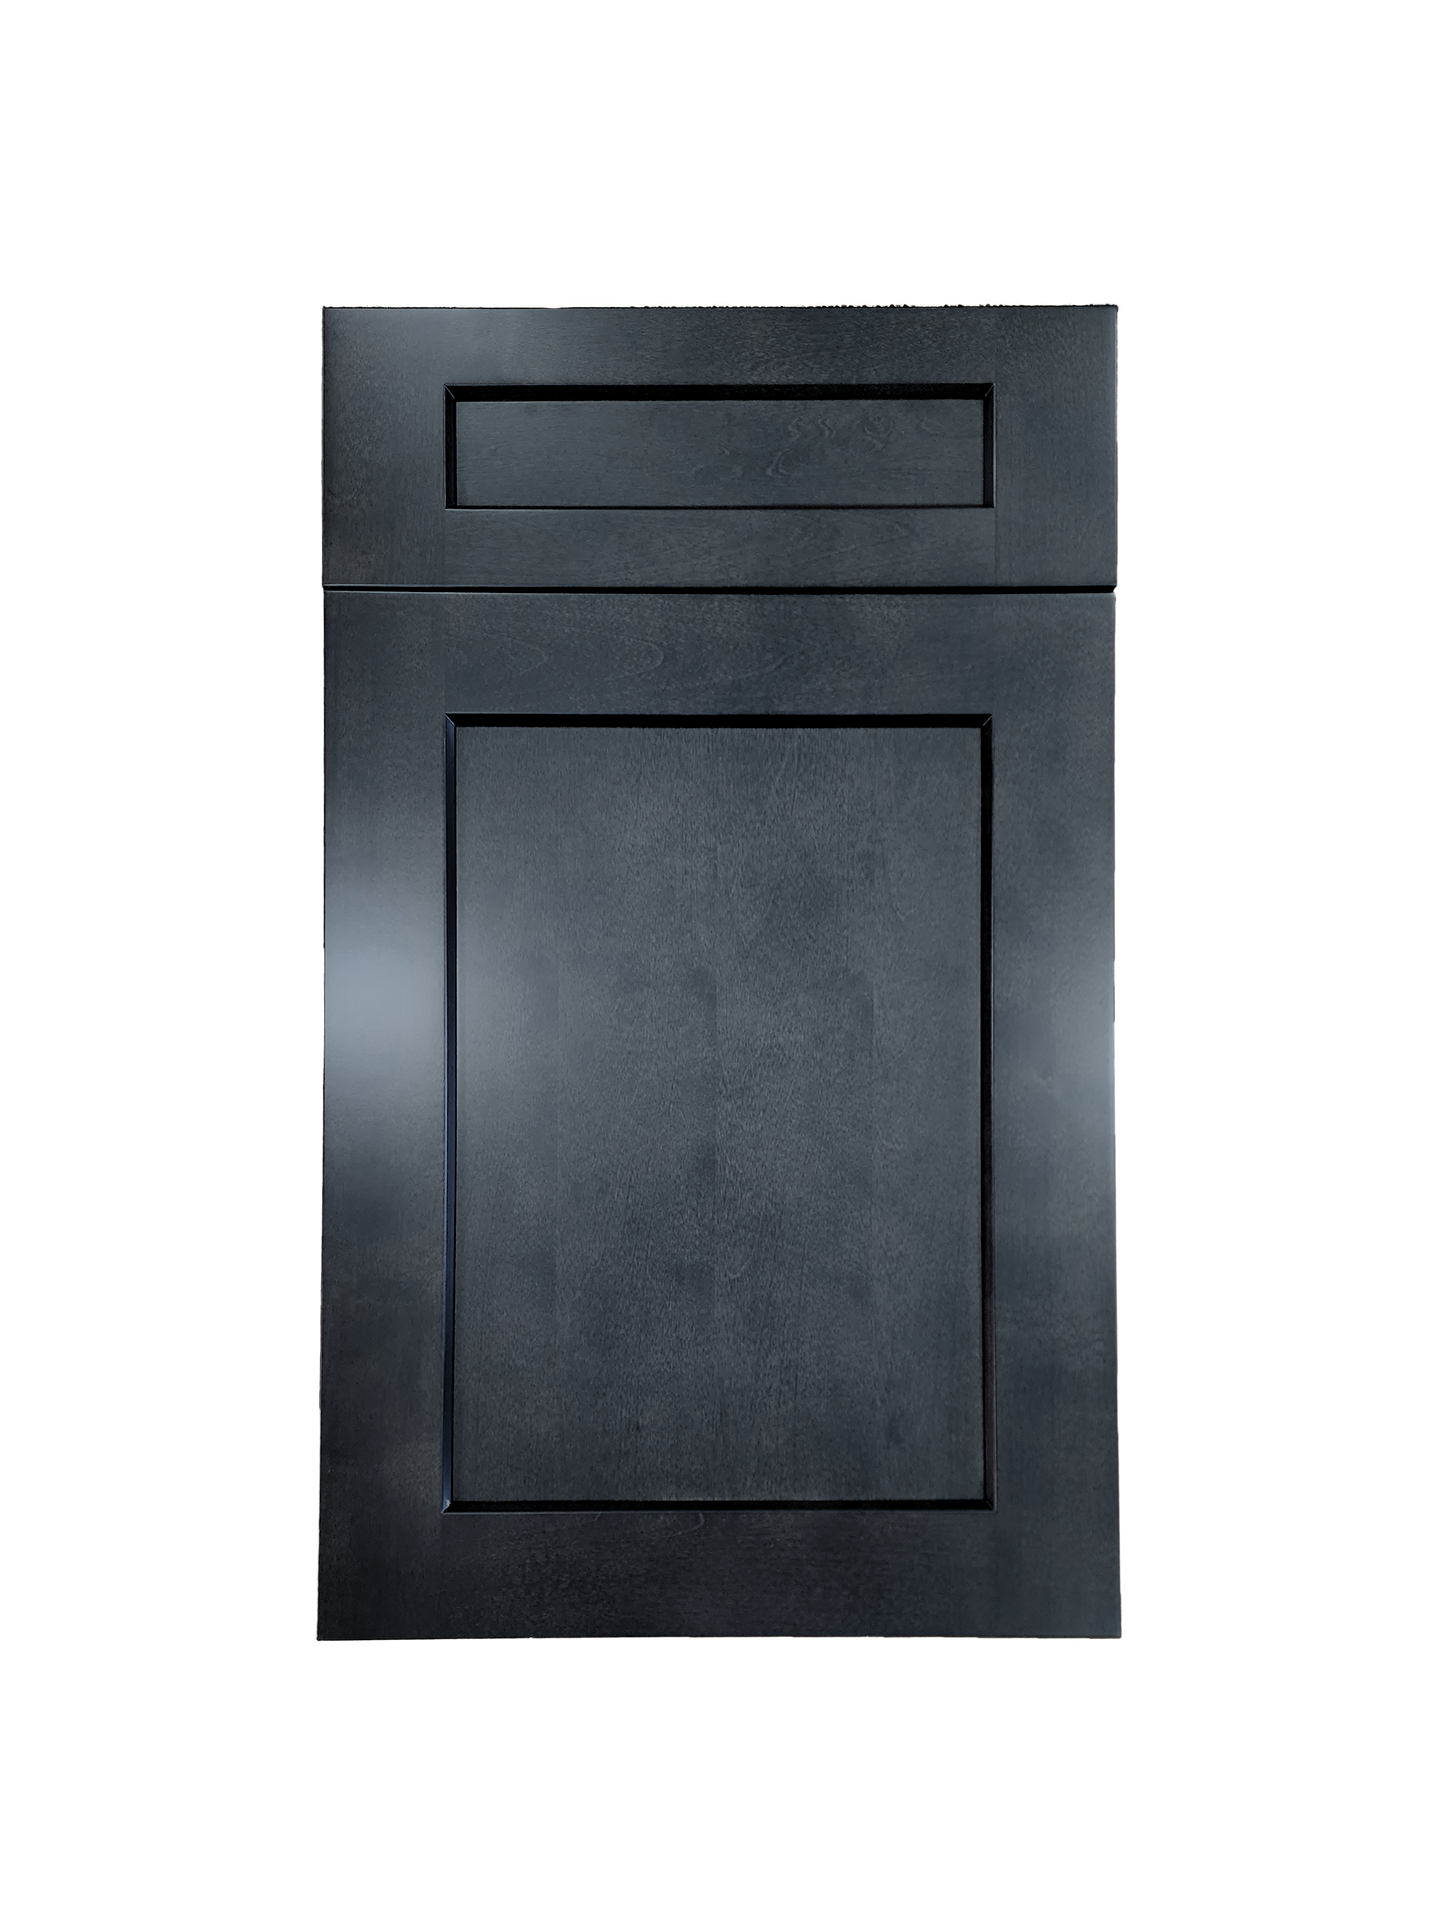 Stormy Grey Wall Cabinet 33 inches wide 12 inches deep 12 inches tall with Stormy Grey box and Stormy Grey doors